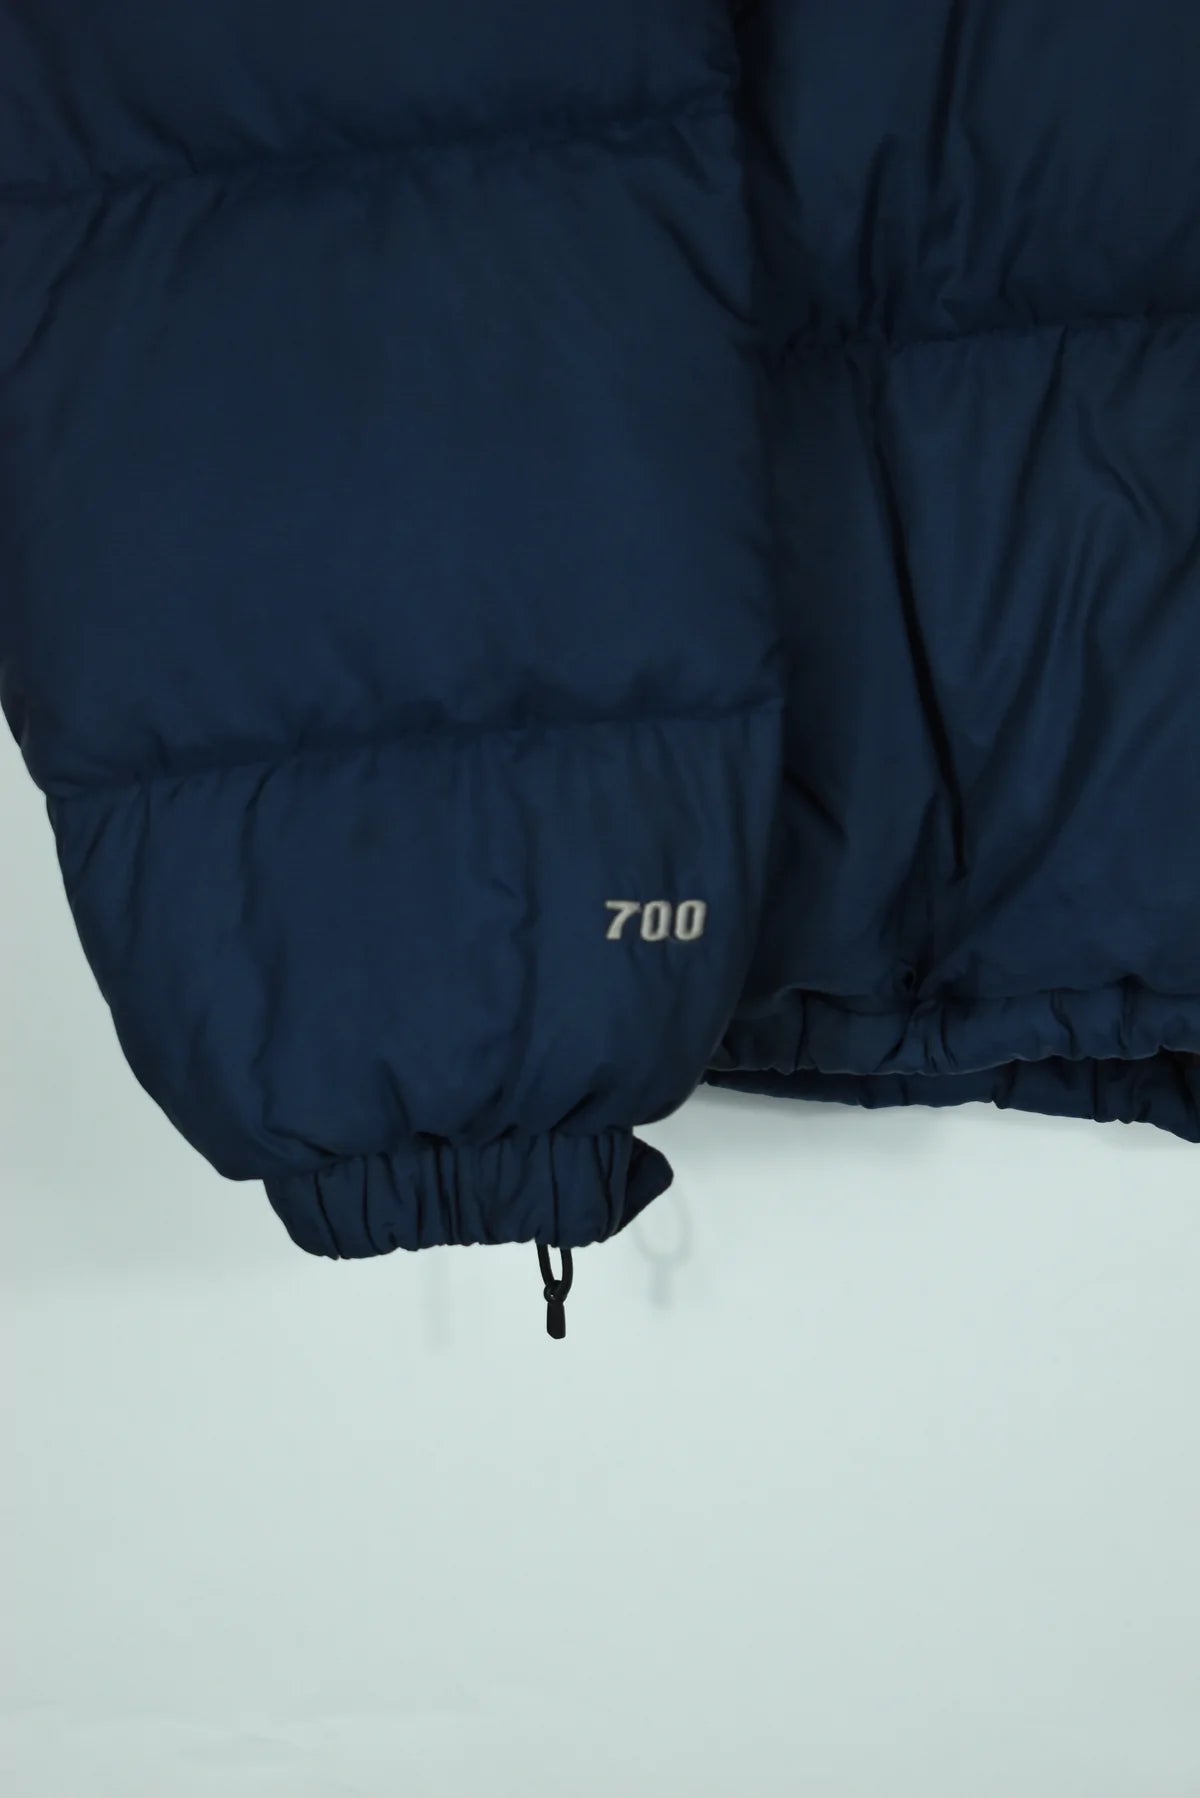 VINTAGE NORTH FACE NUPTSE 700 PUFFER NAVY LARGE